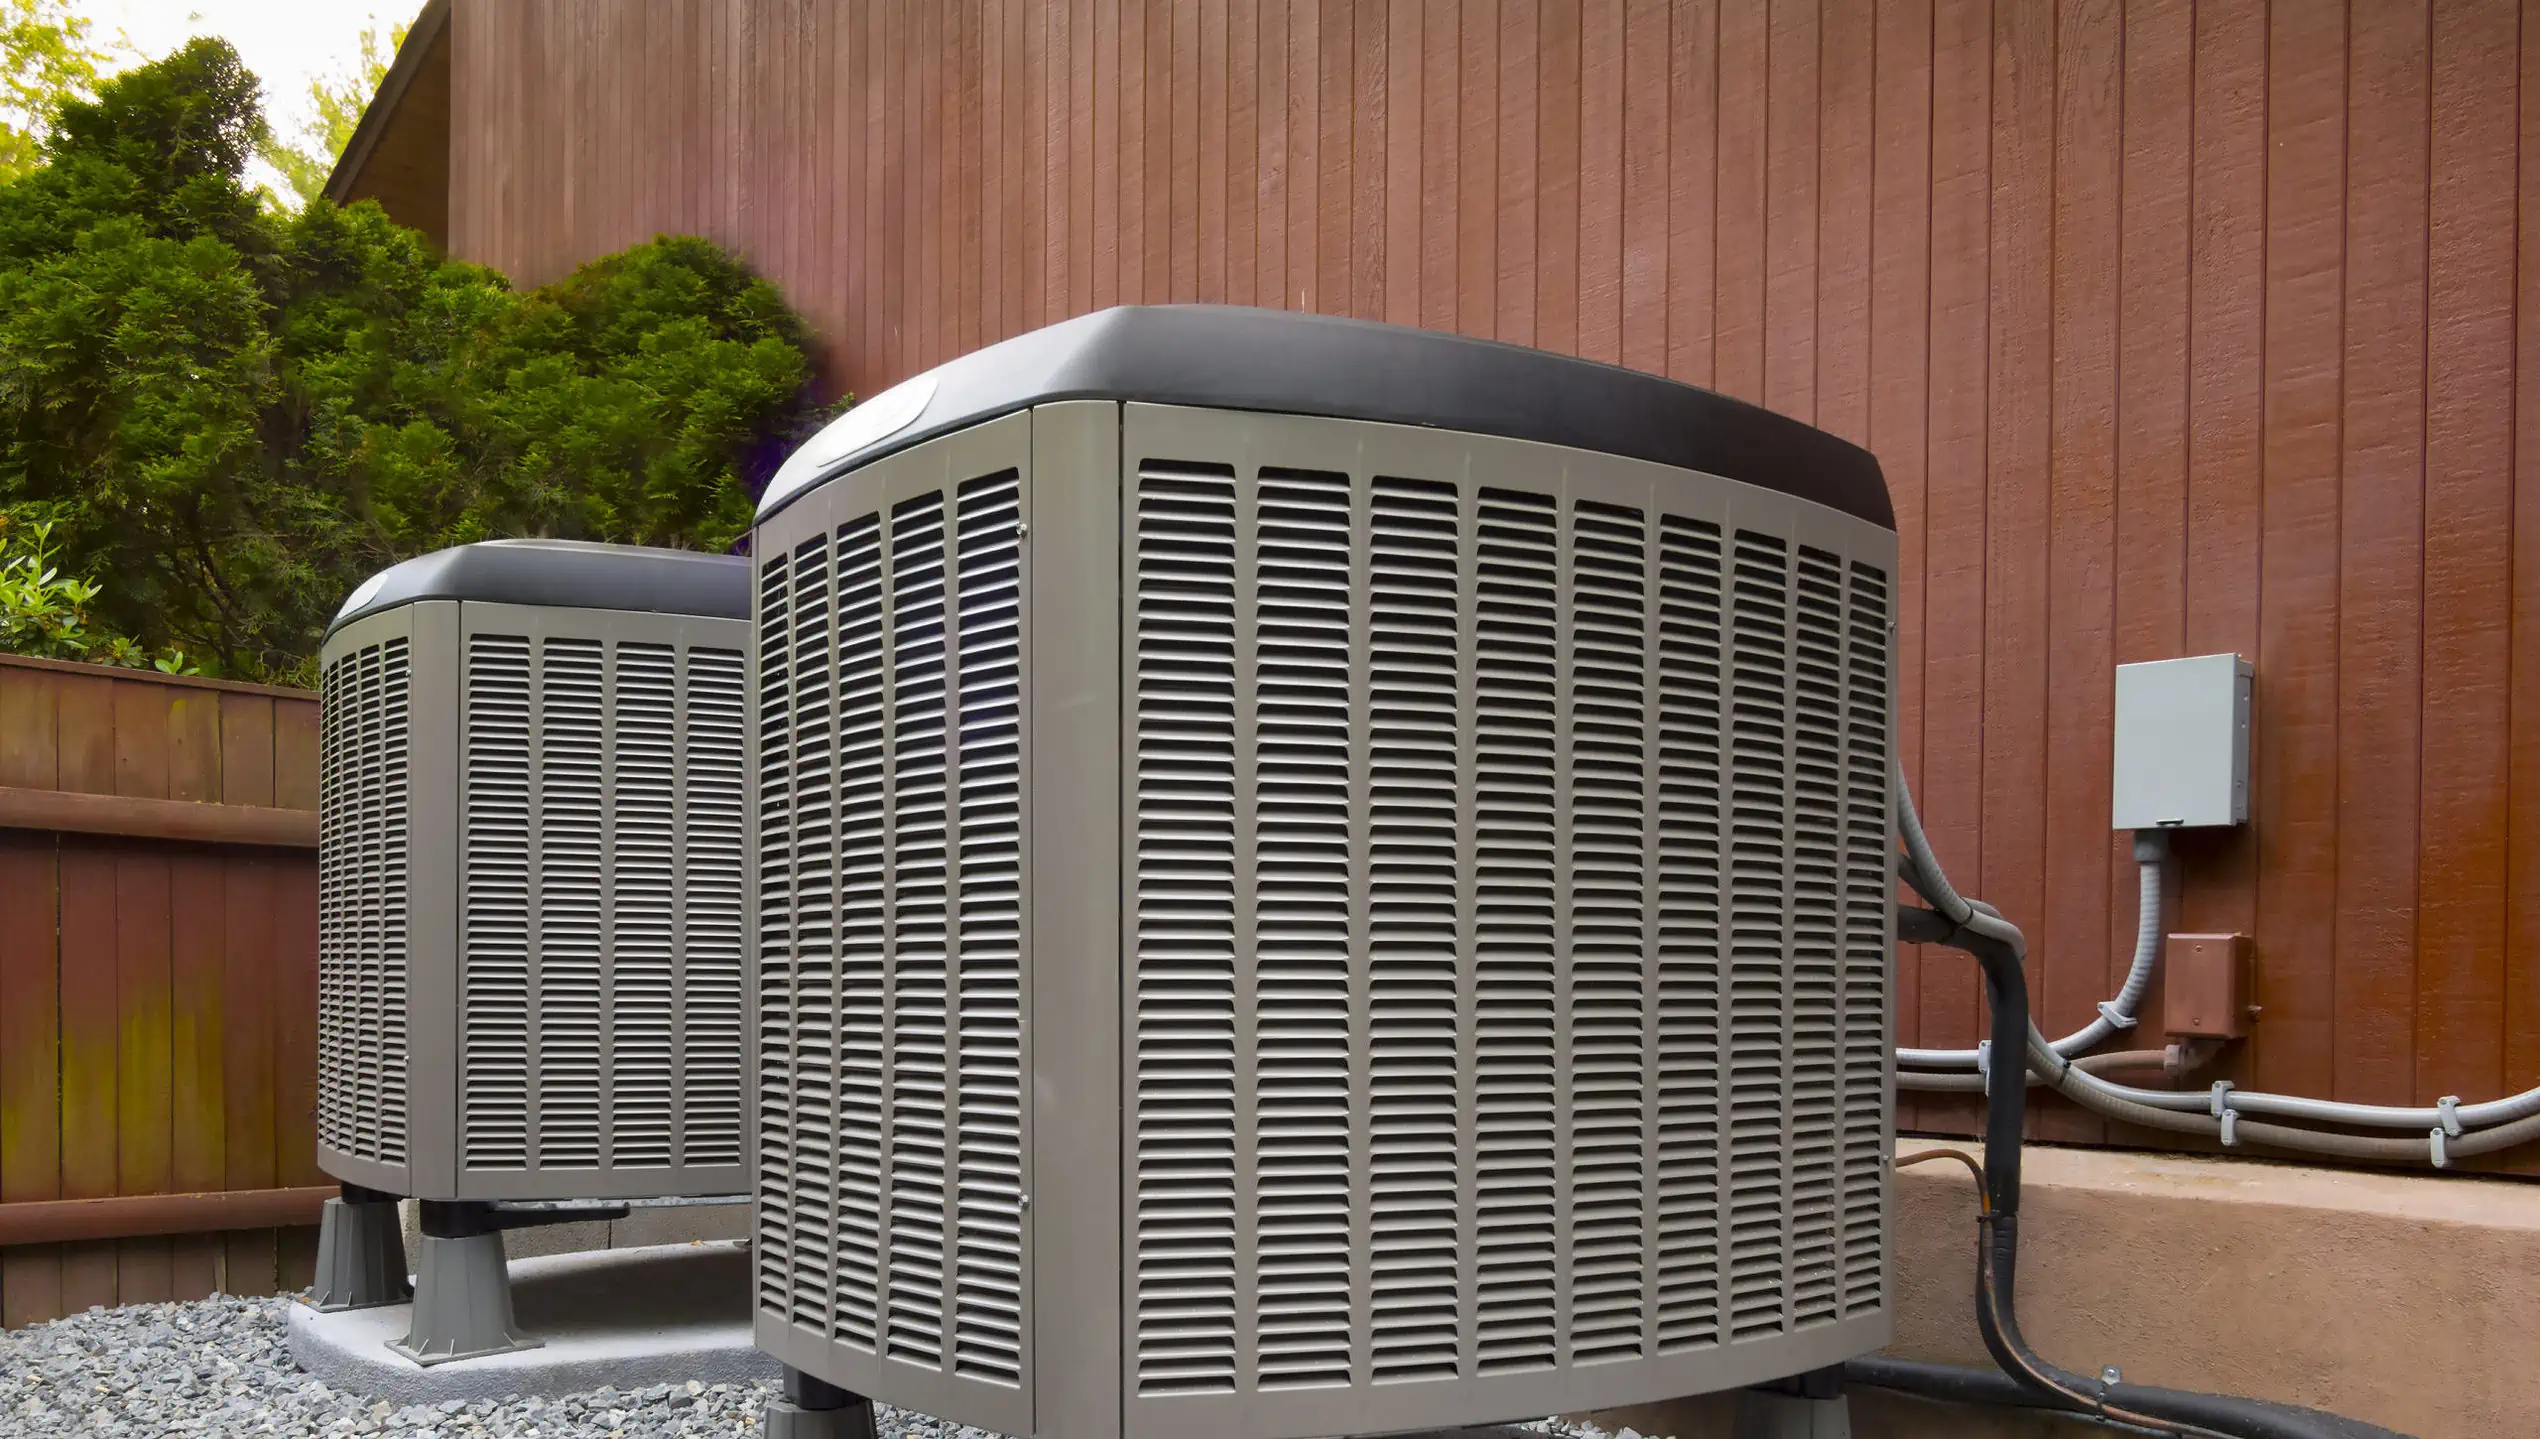 HVAC heating and air conditioning residential units
** Note: Soft Focus at 100%, best at smaller sizes